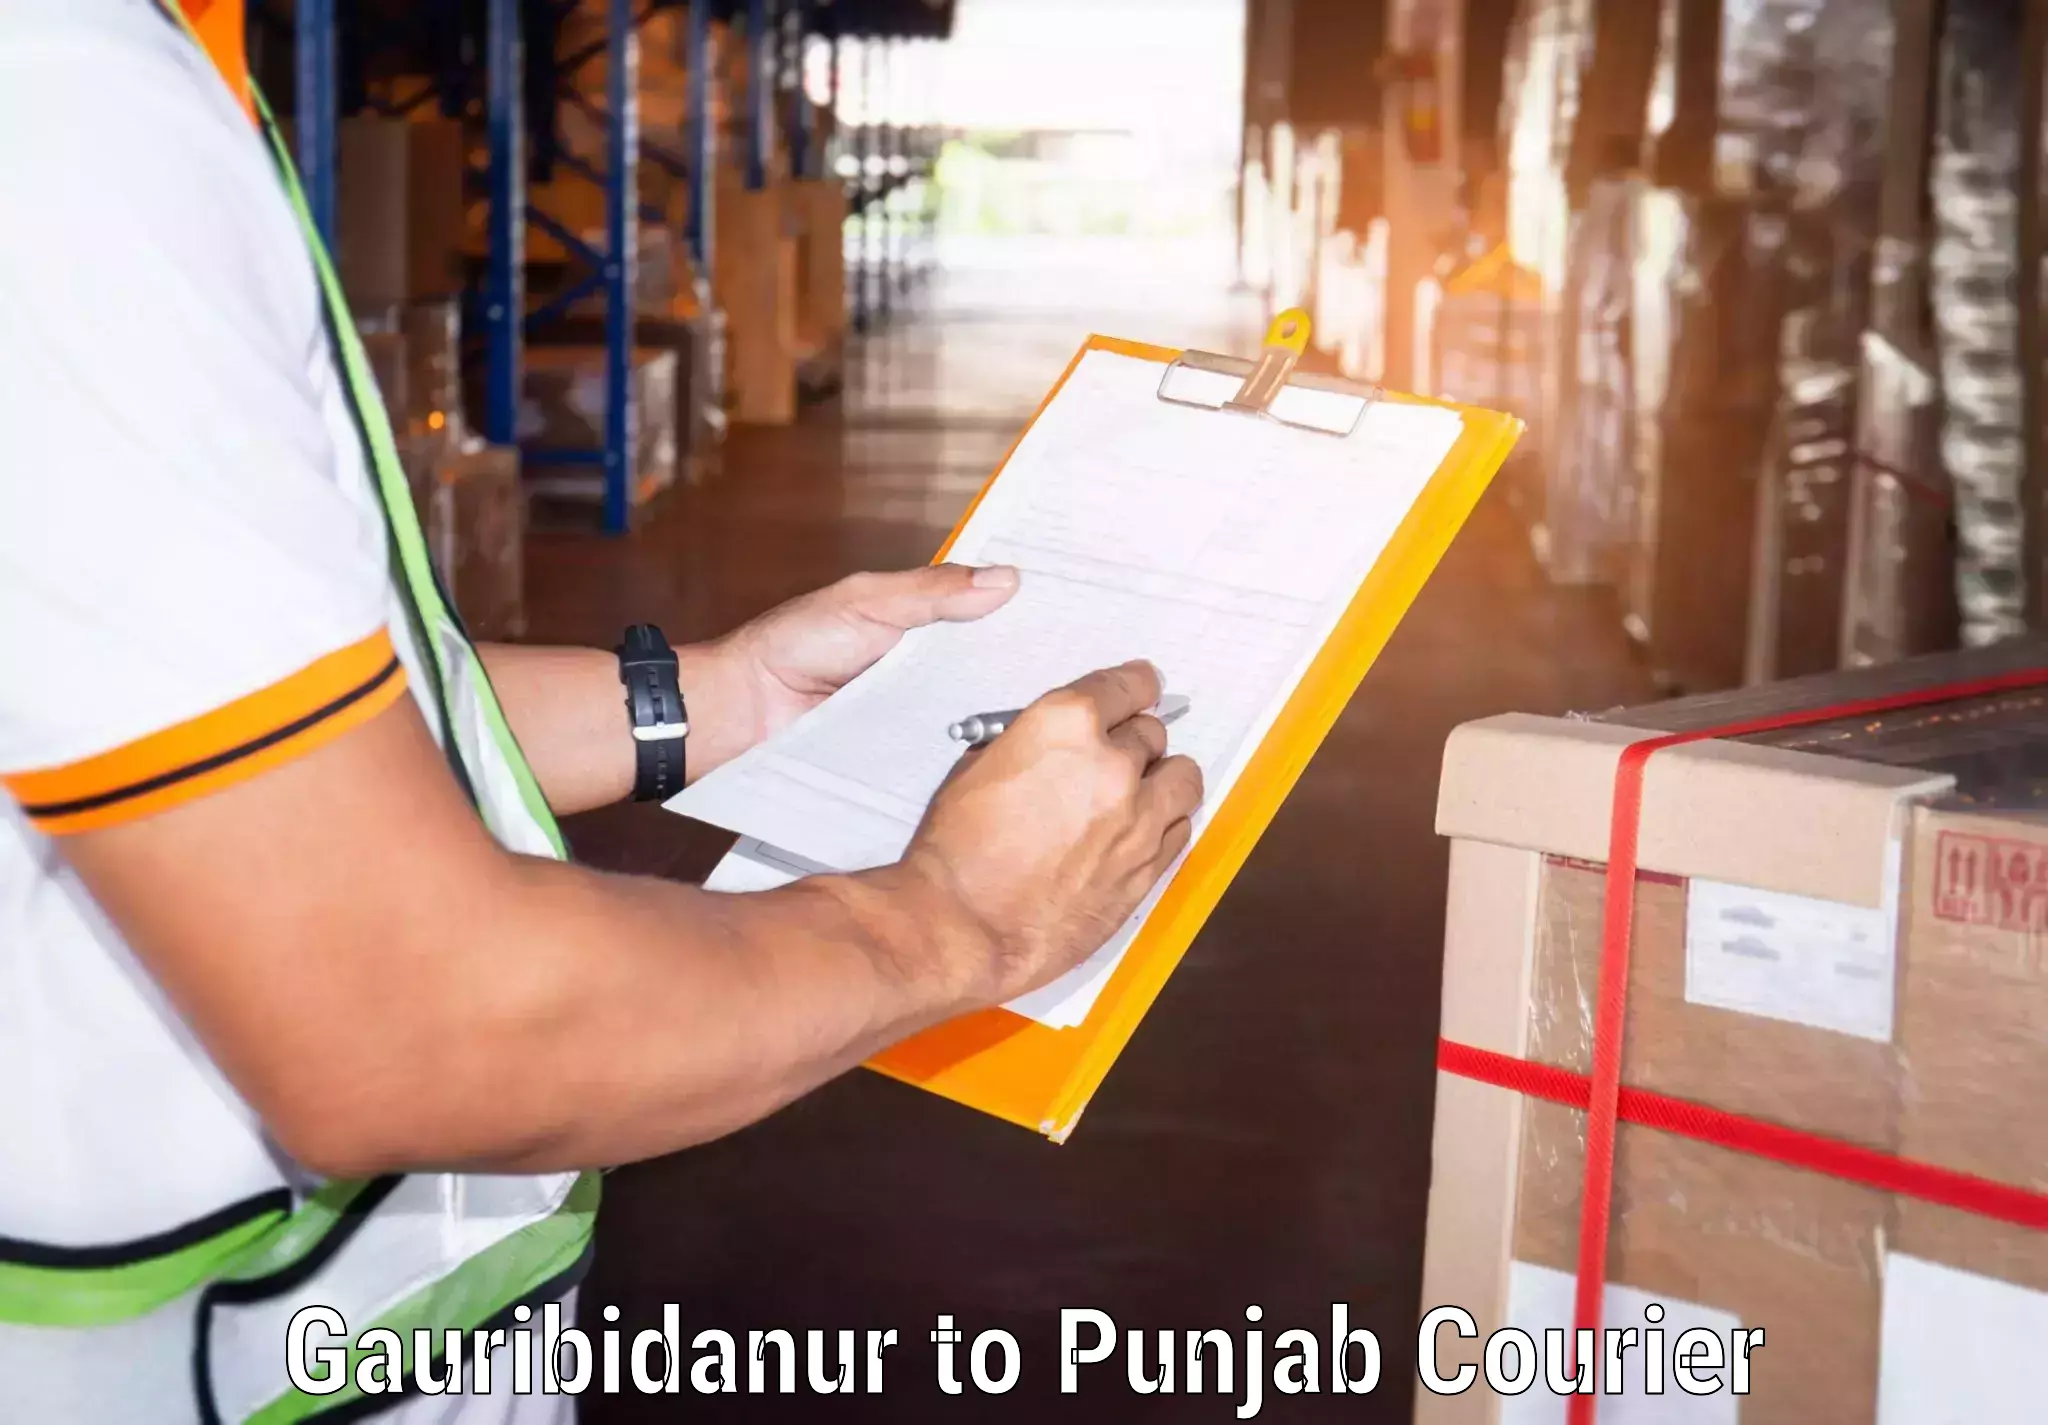 Global shipping networks Gauribidanur to Sultanpur Lodhi